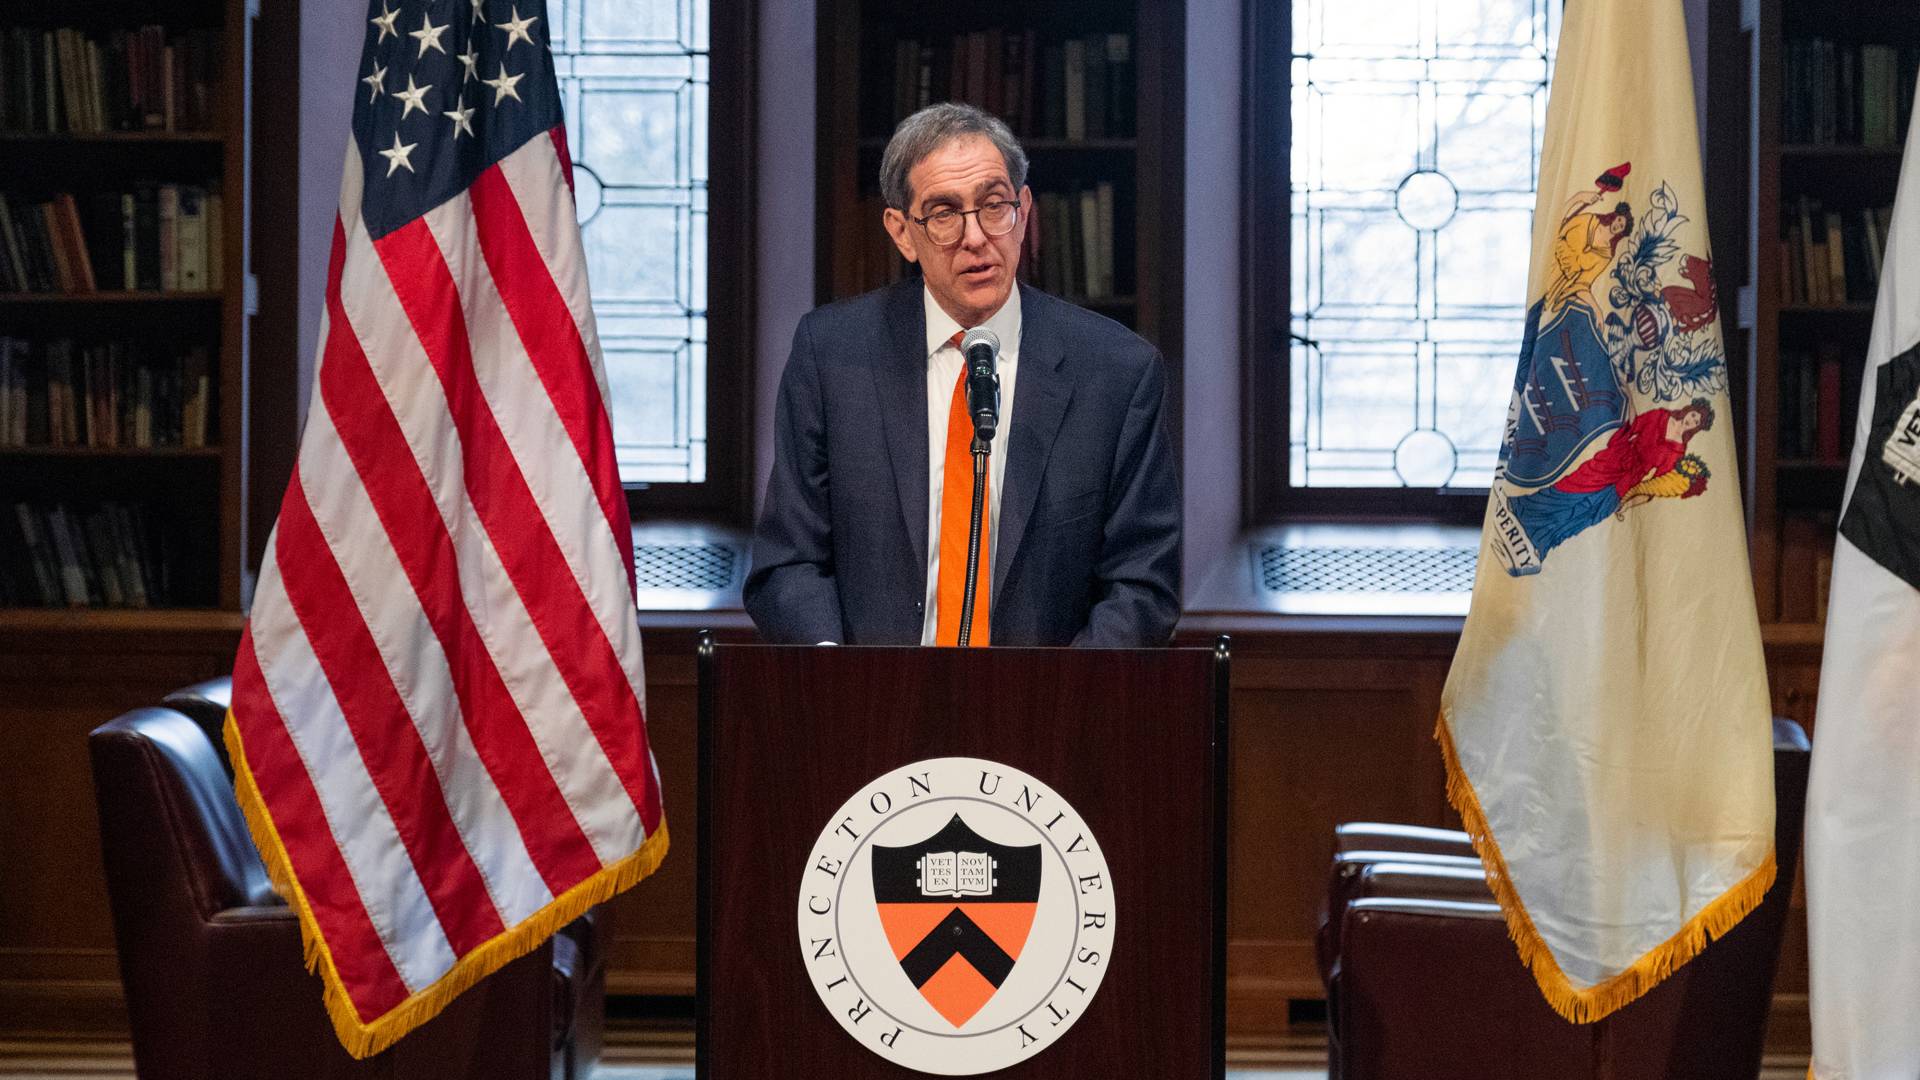 Princeton President Christopher L. Eisgruber speaking at a podium in the Chancellor Green Library in front of a large audience